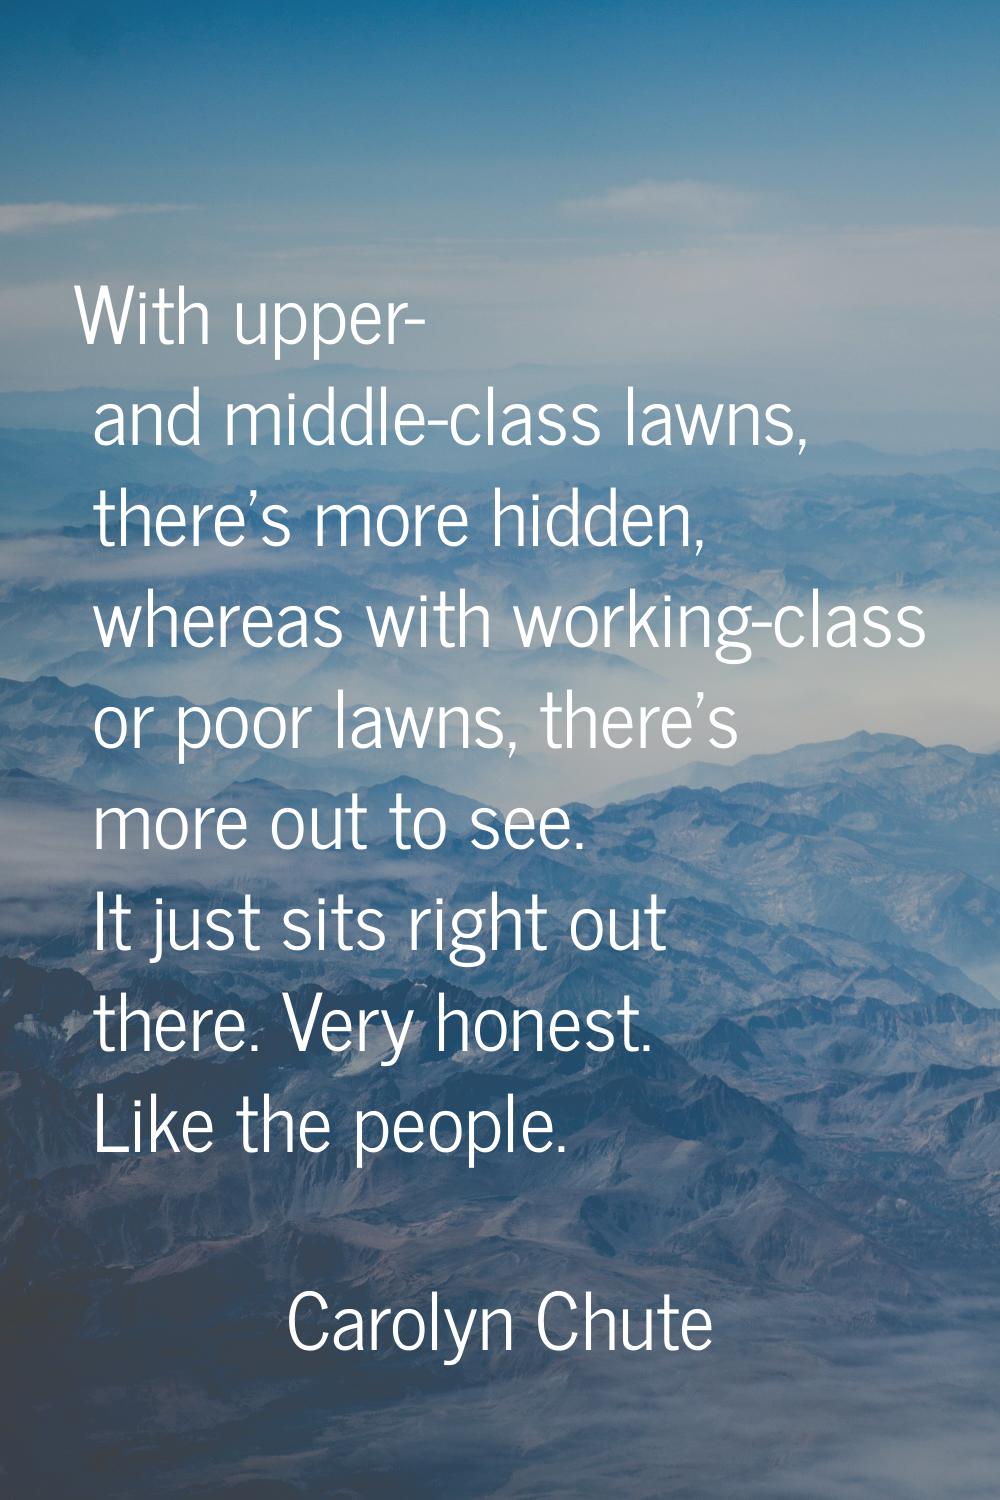 With upper- and middle-class lawns, there's more hidden, whereas with working-class or poor lawns, 